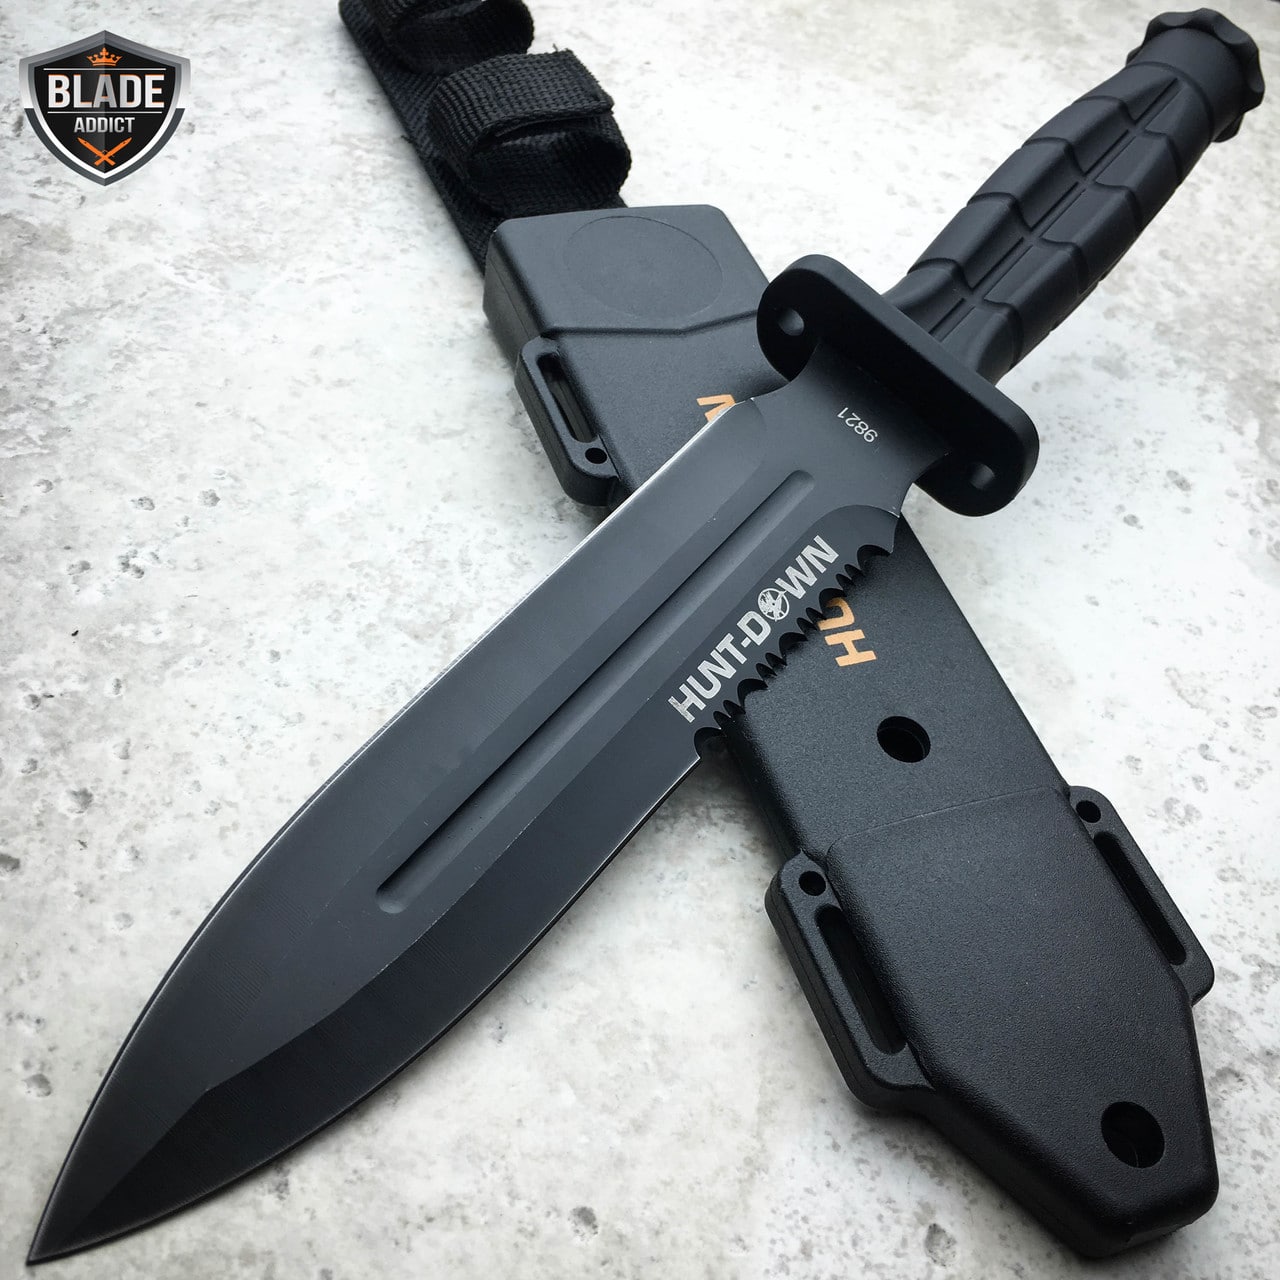 12" TACTICAL BOWIE SURVIVAL HUNTING KNIFE MILITARY DAGGER Fixed Blade